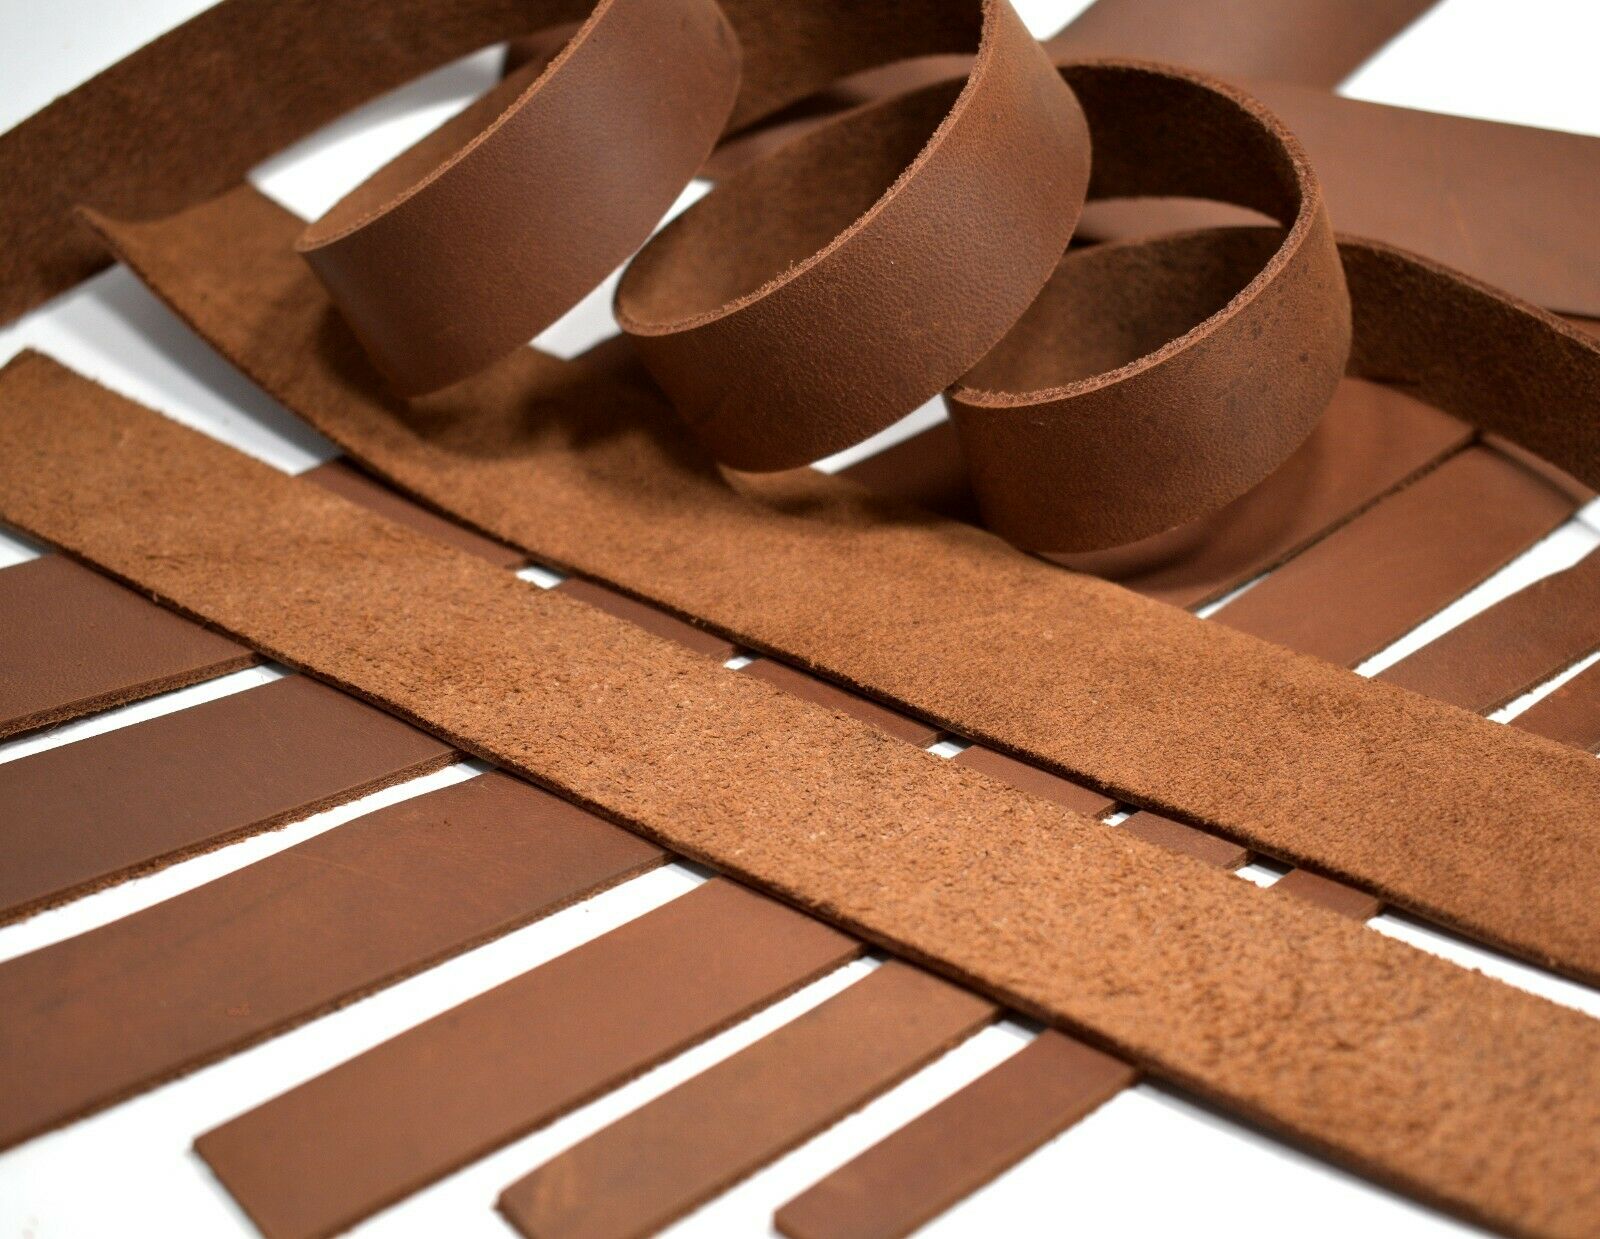 Brown Oil-tanned Leather (5-6oz Med Weight: 5/64"-3/32") Strip Strap Leatherrush